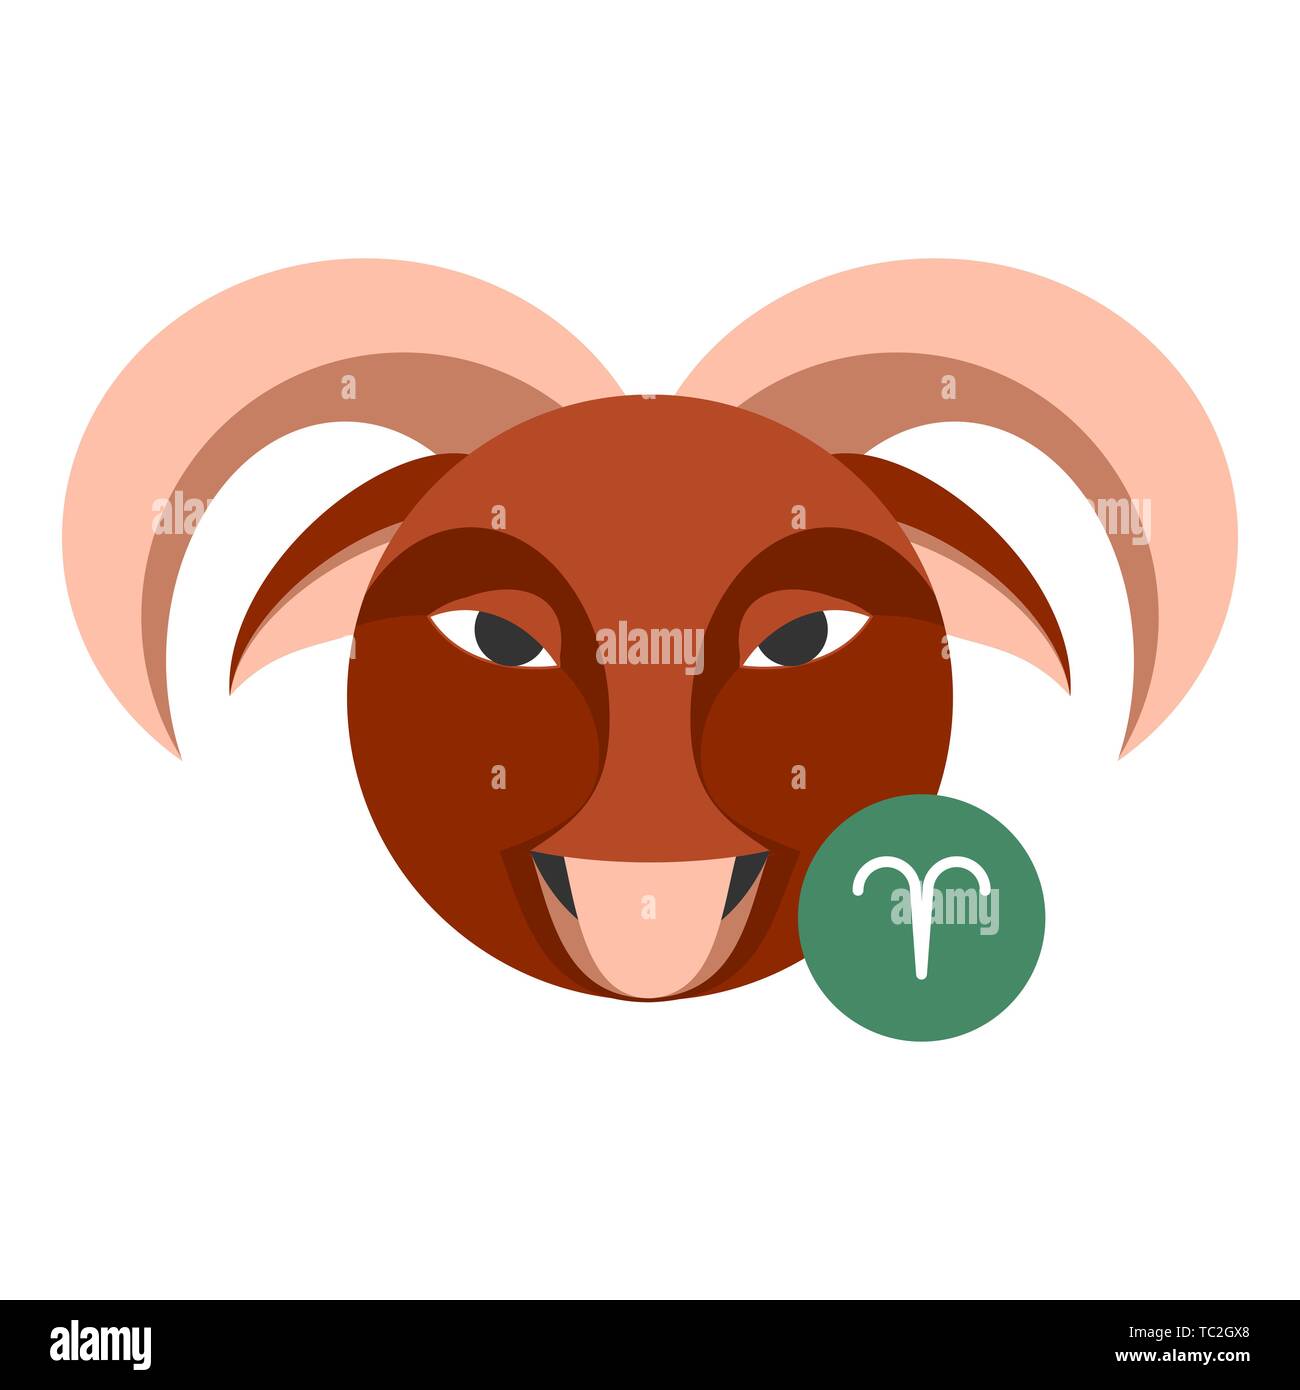 Aries astrology sign isolated on white. Horoscope symbol represented as ram horns. Zodiac constellations astrological mythology icon vector design ill Stock Vector